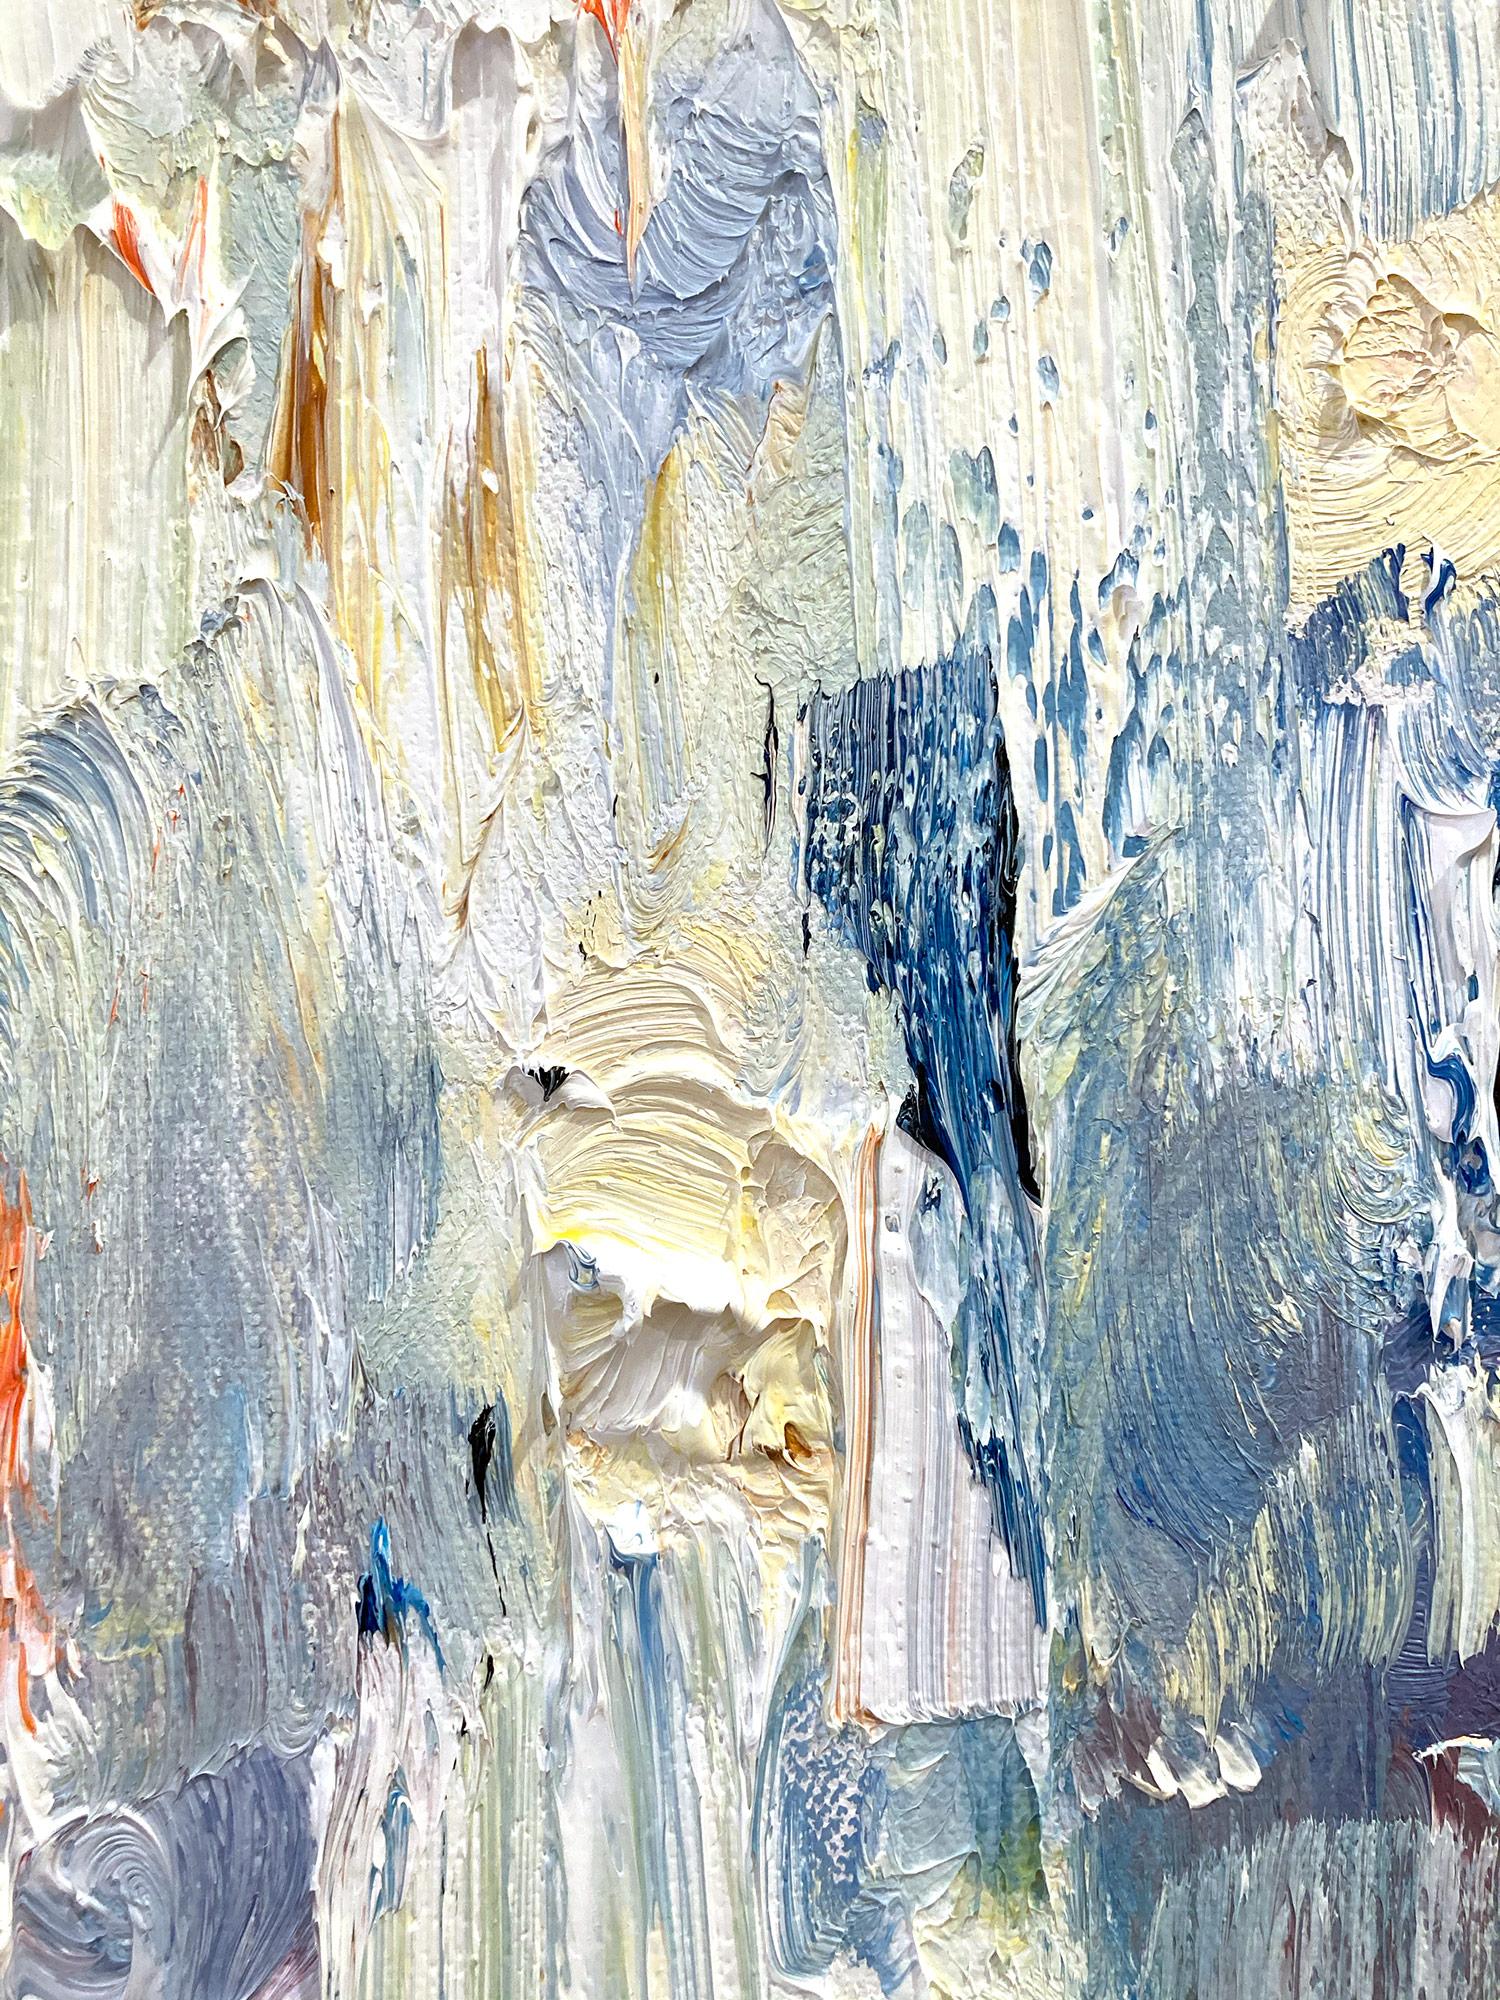 water dripping painting